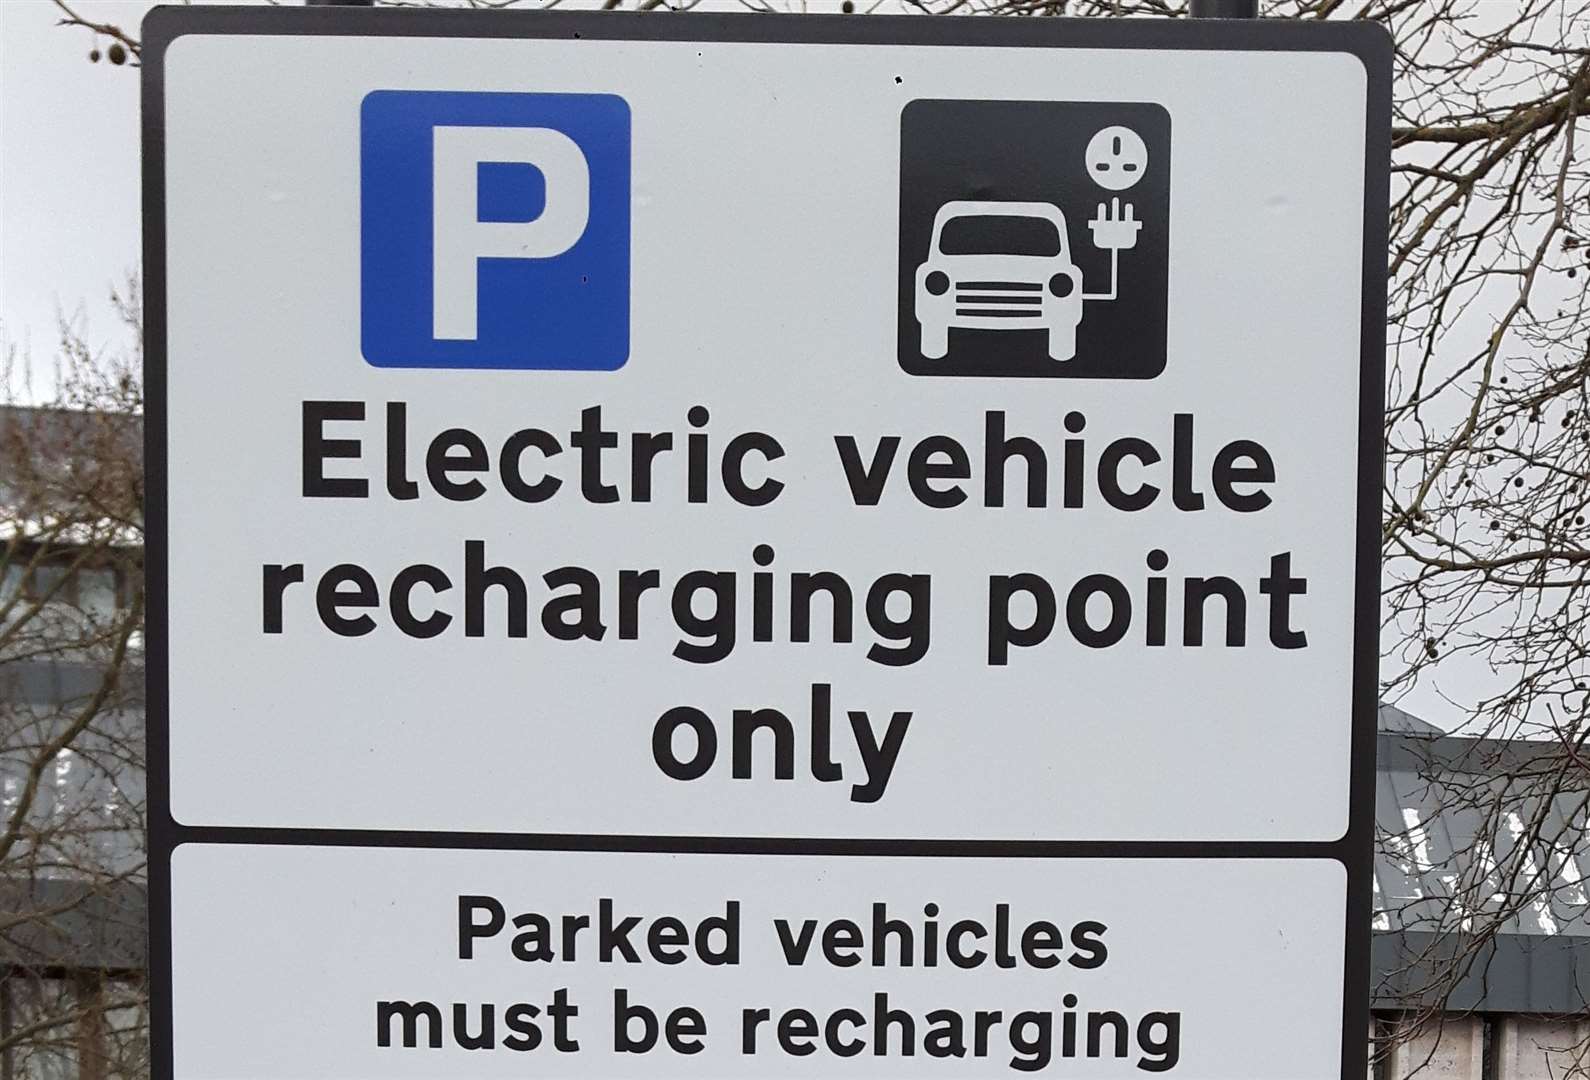 Car parks - including this one in Maidstone - are increasingly including chargepoints